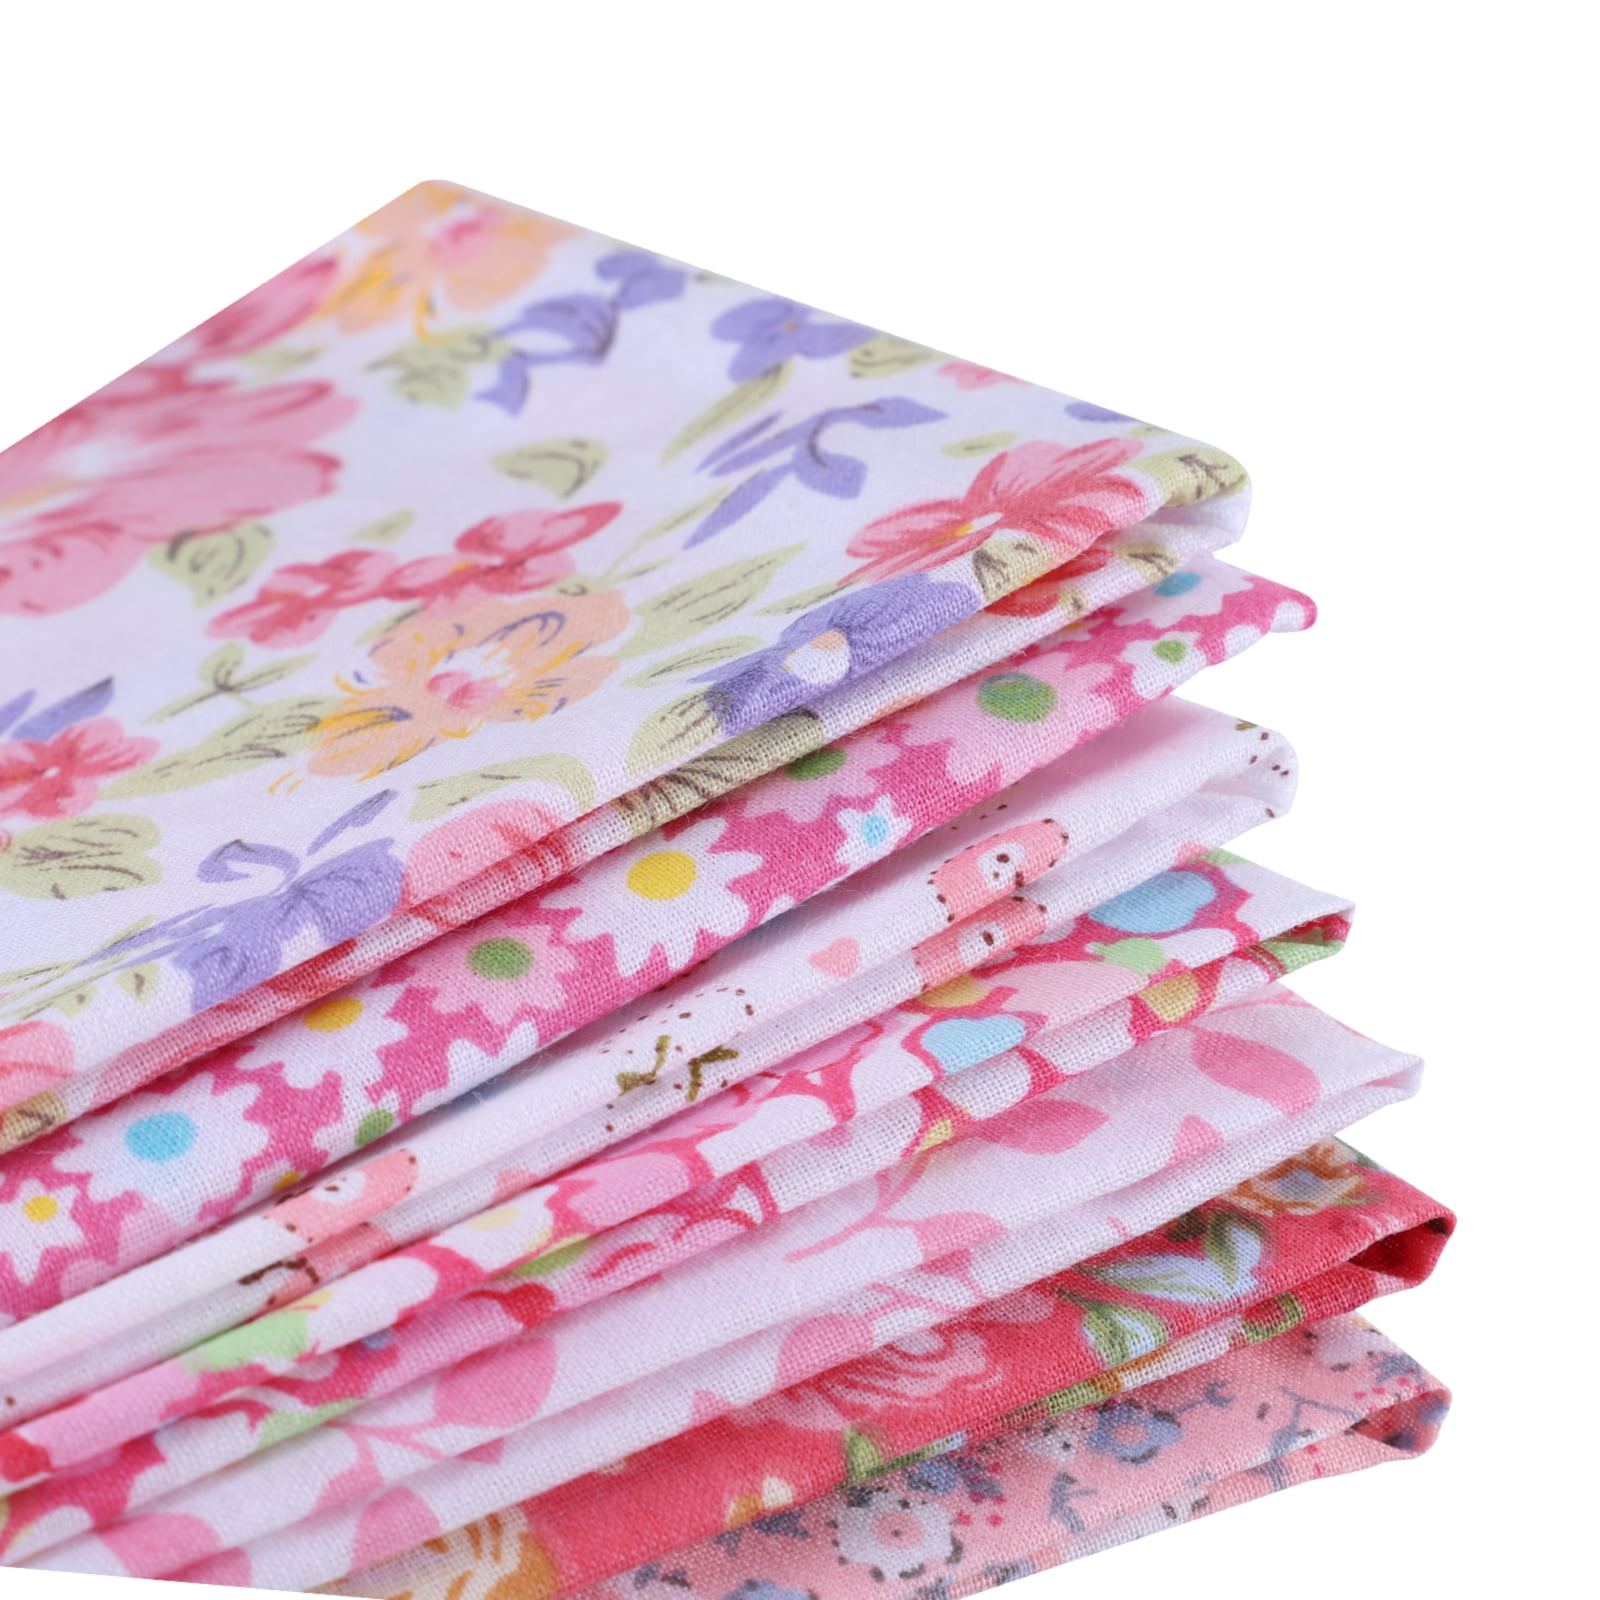 7pcs Dollhouse Curtain Quilting Fabric Pink for Sewing Crafting DIY Material 